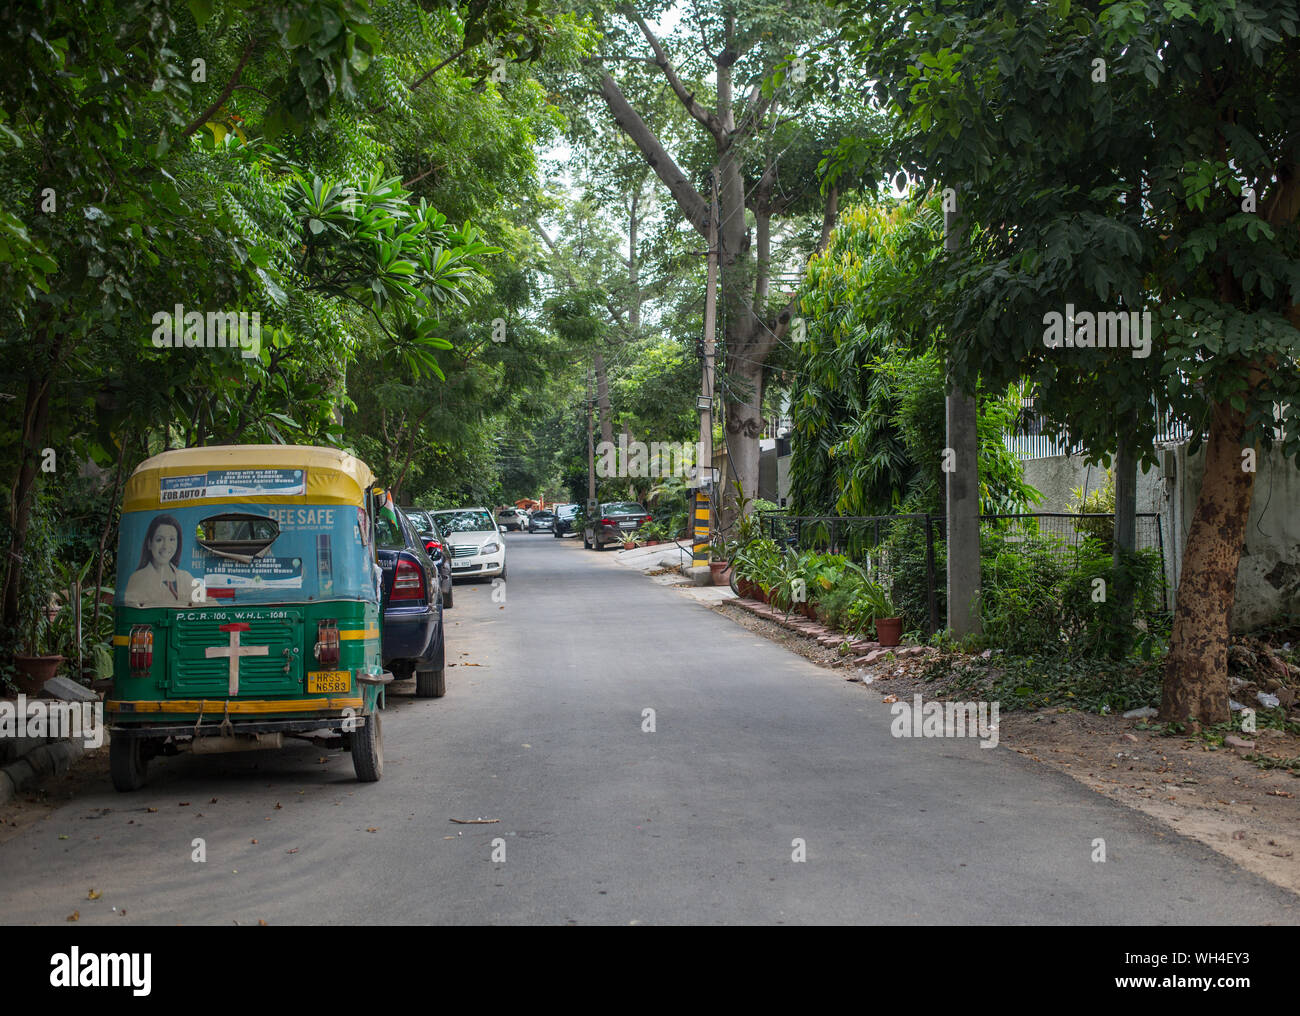 A small green street in Gurgaon, India Stock Photo